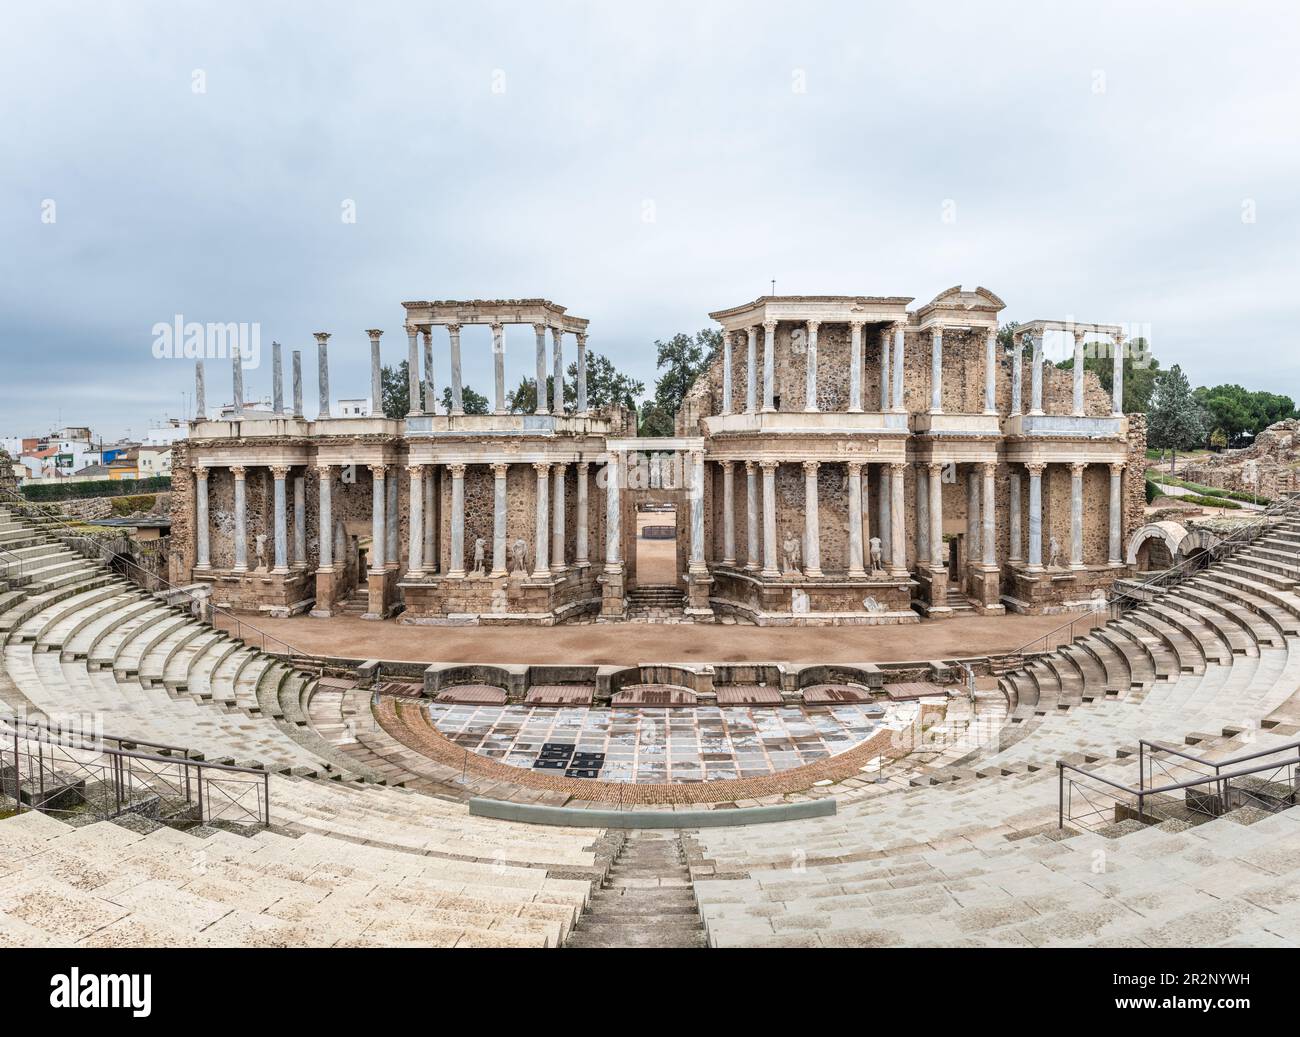 Wide-angle view of the Roman Theatre of Merida in Extremadura, Spain. Built in the years 16 to 15 BCE, it is still one of the most famous and visited Stock Photo